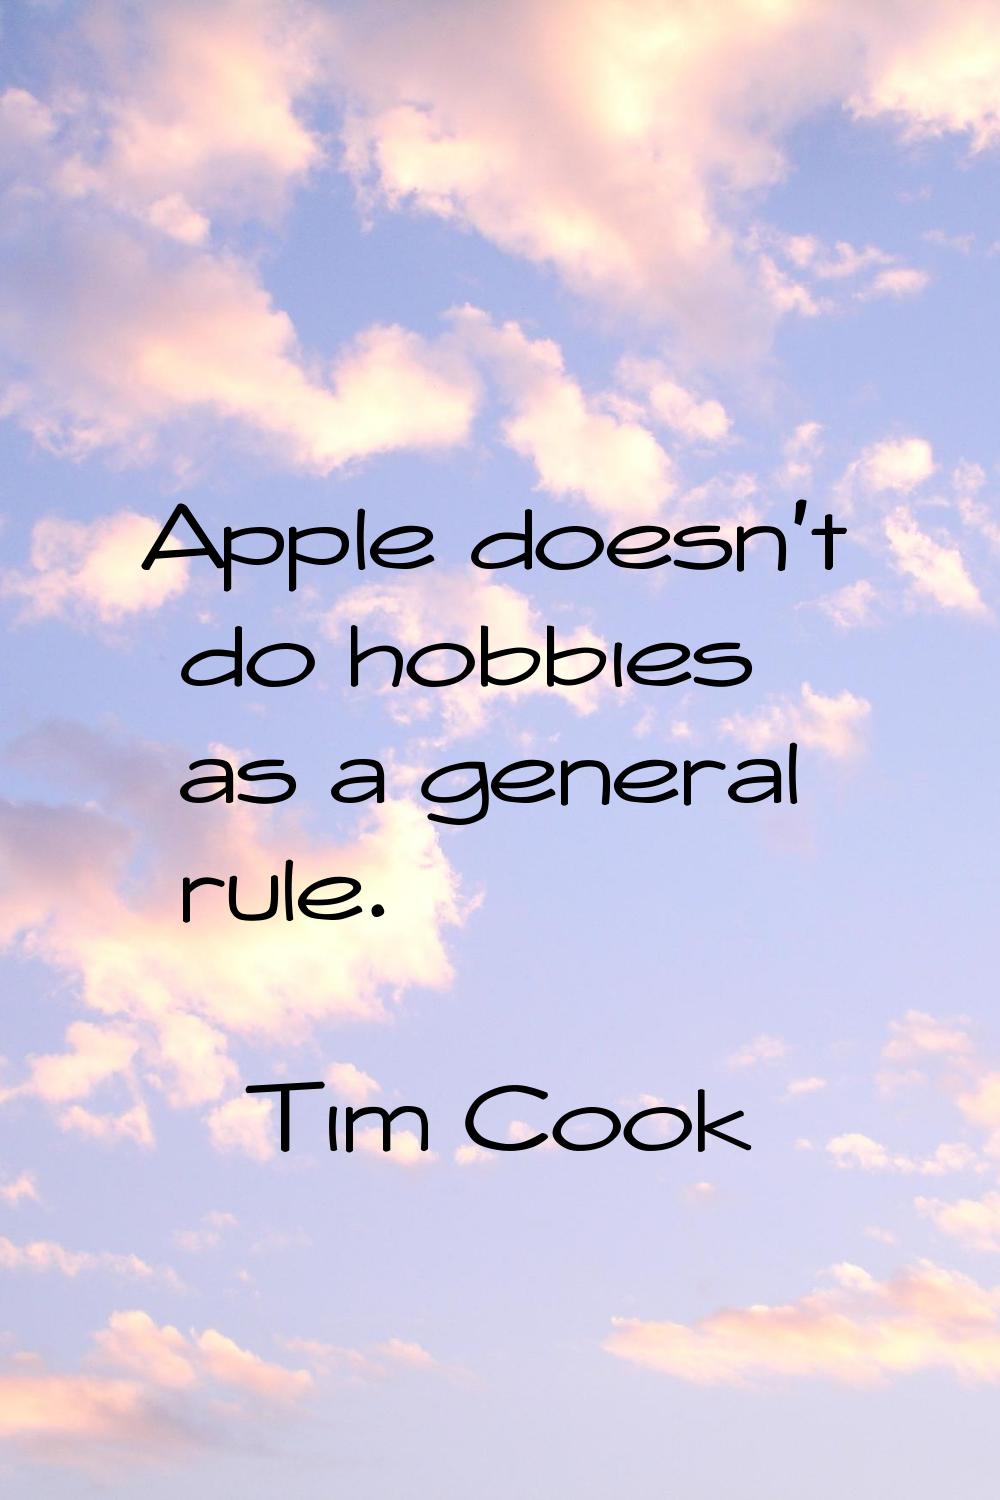 Apple doesn't do hobbies as a general rule.